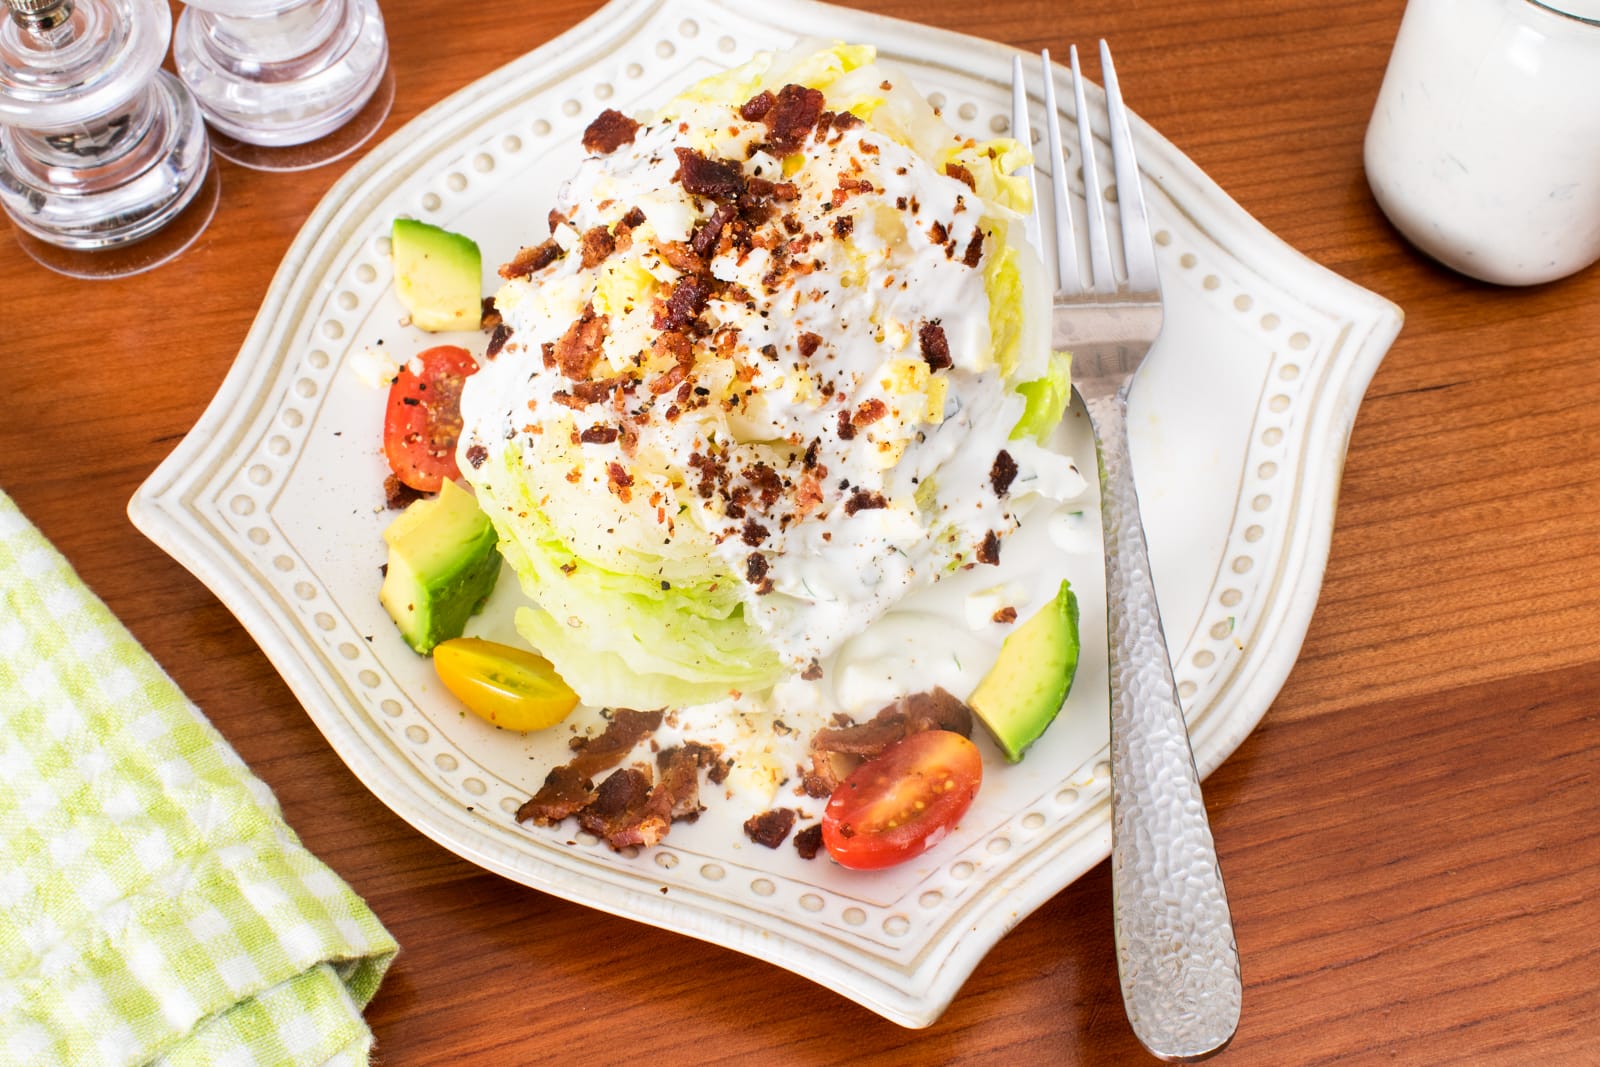 Loaded Wedge Salad with Herb Buttermilk Dressing